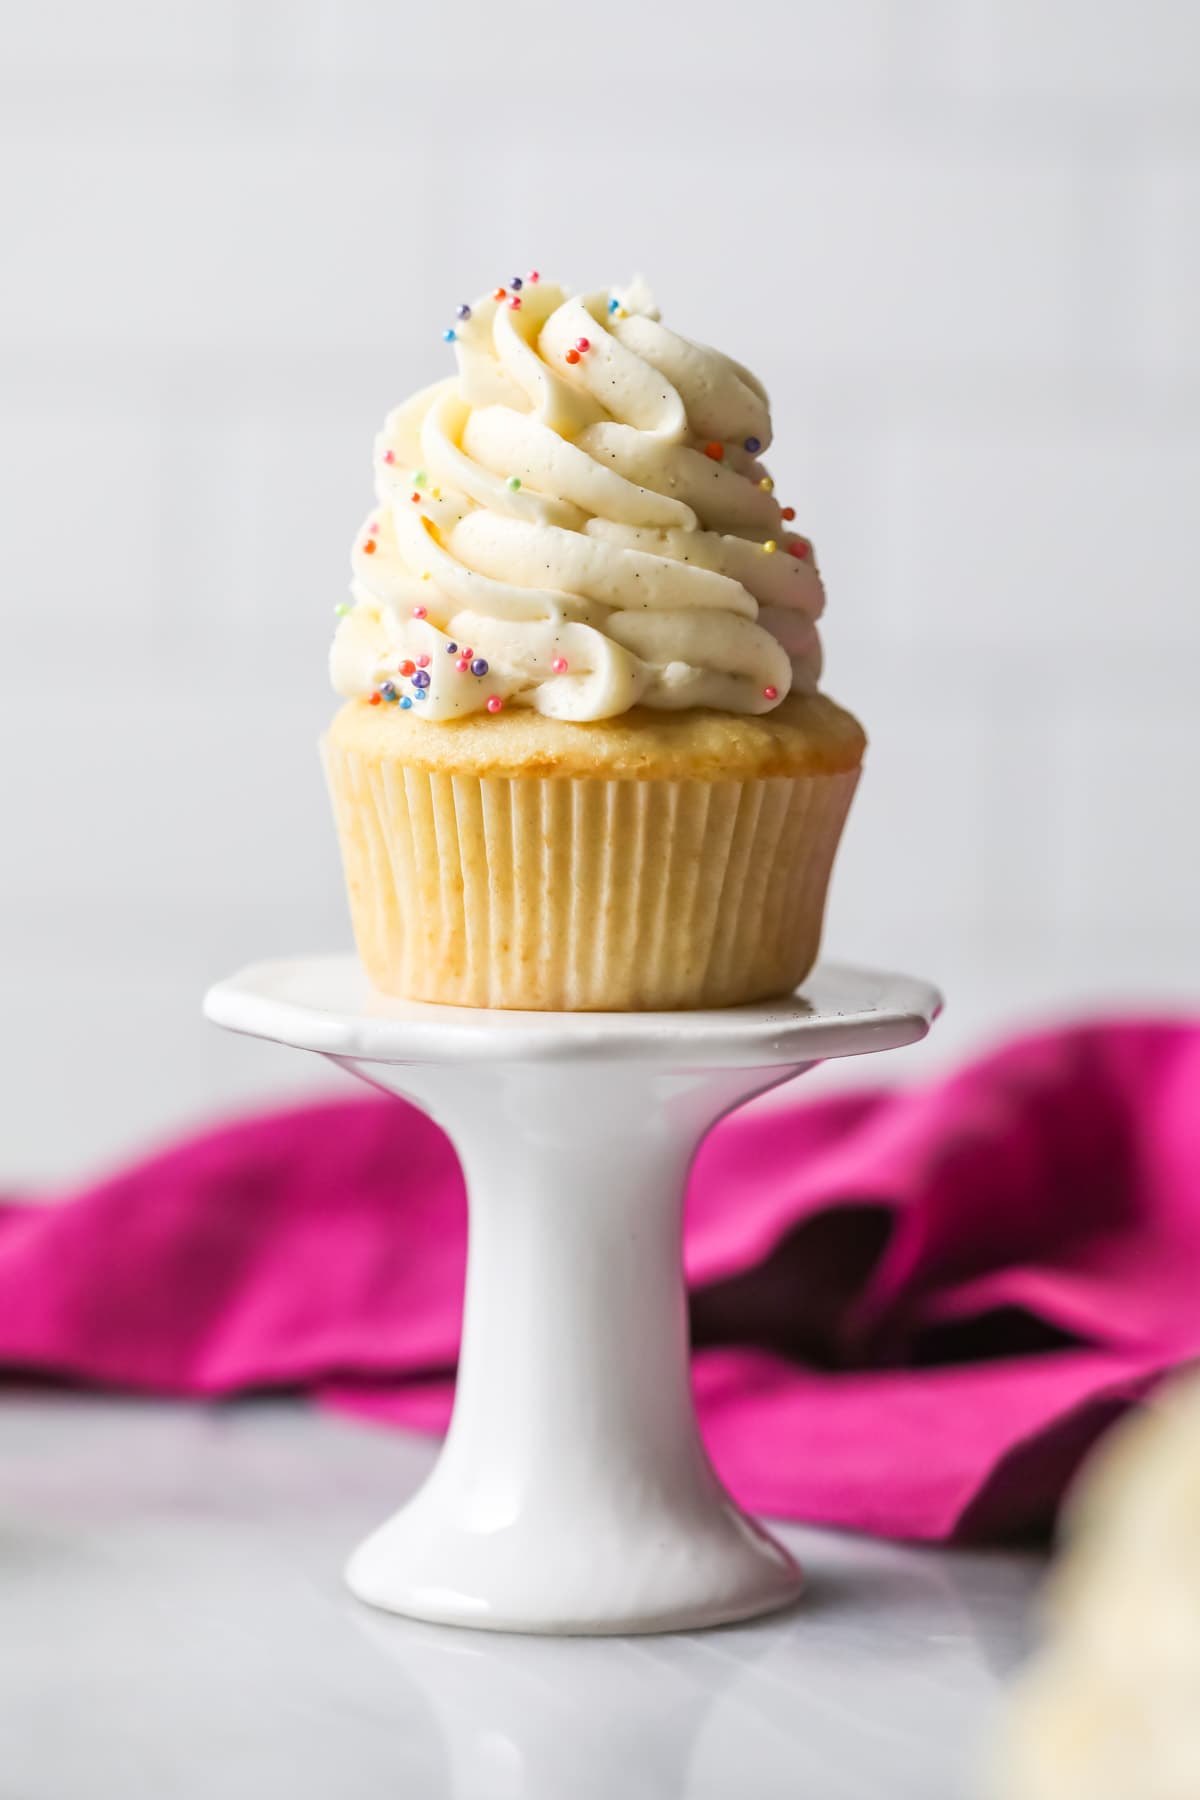 Vanilla cupcake on a pedestal topped with a tall swirl of vanilla bean frosting.